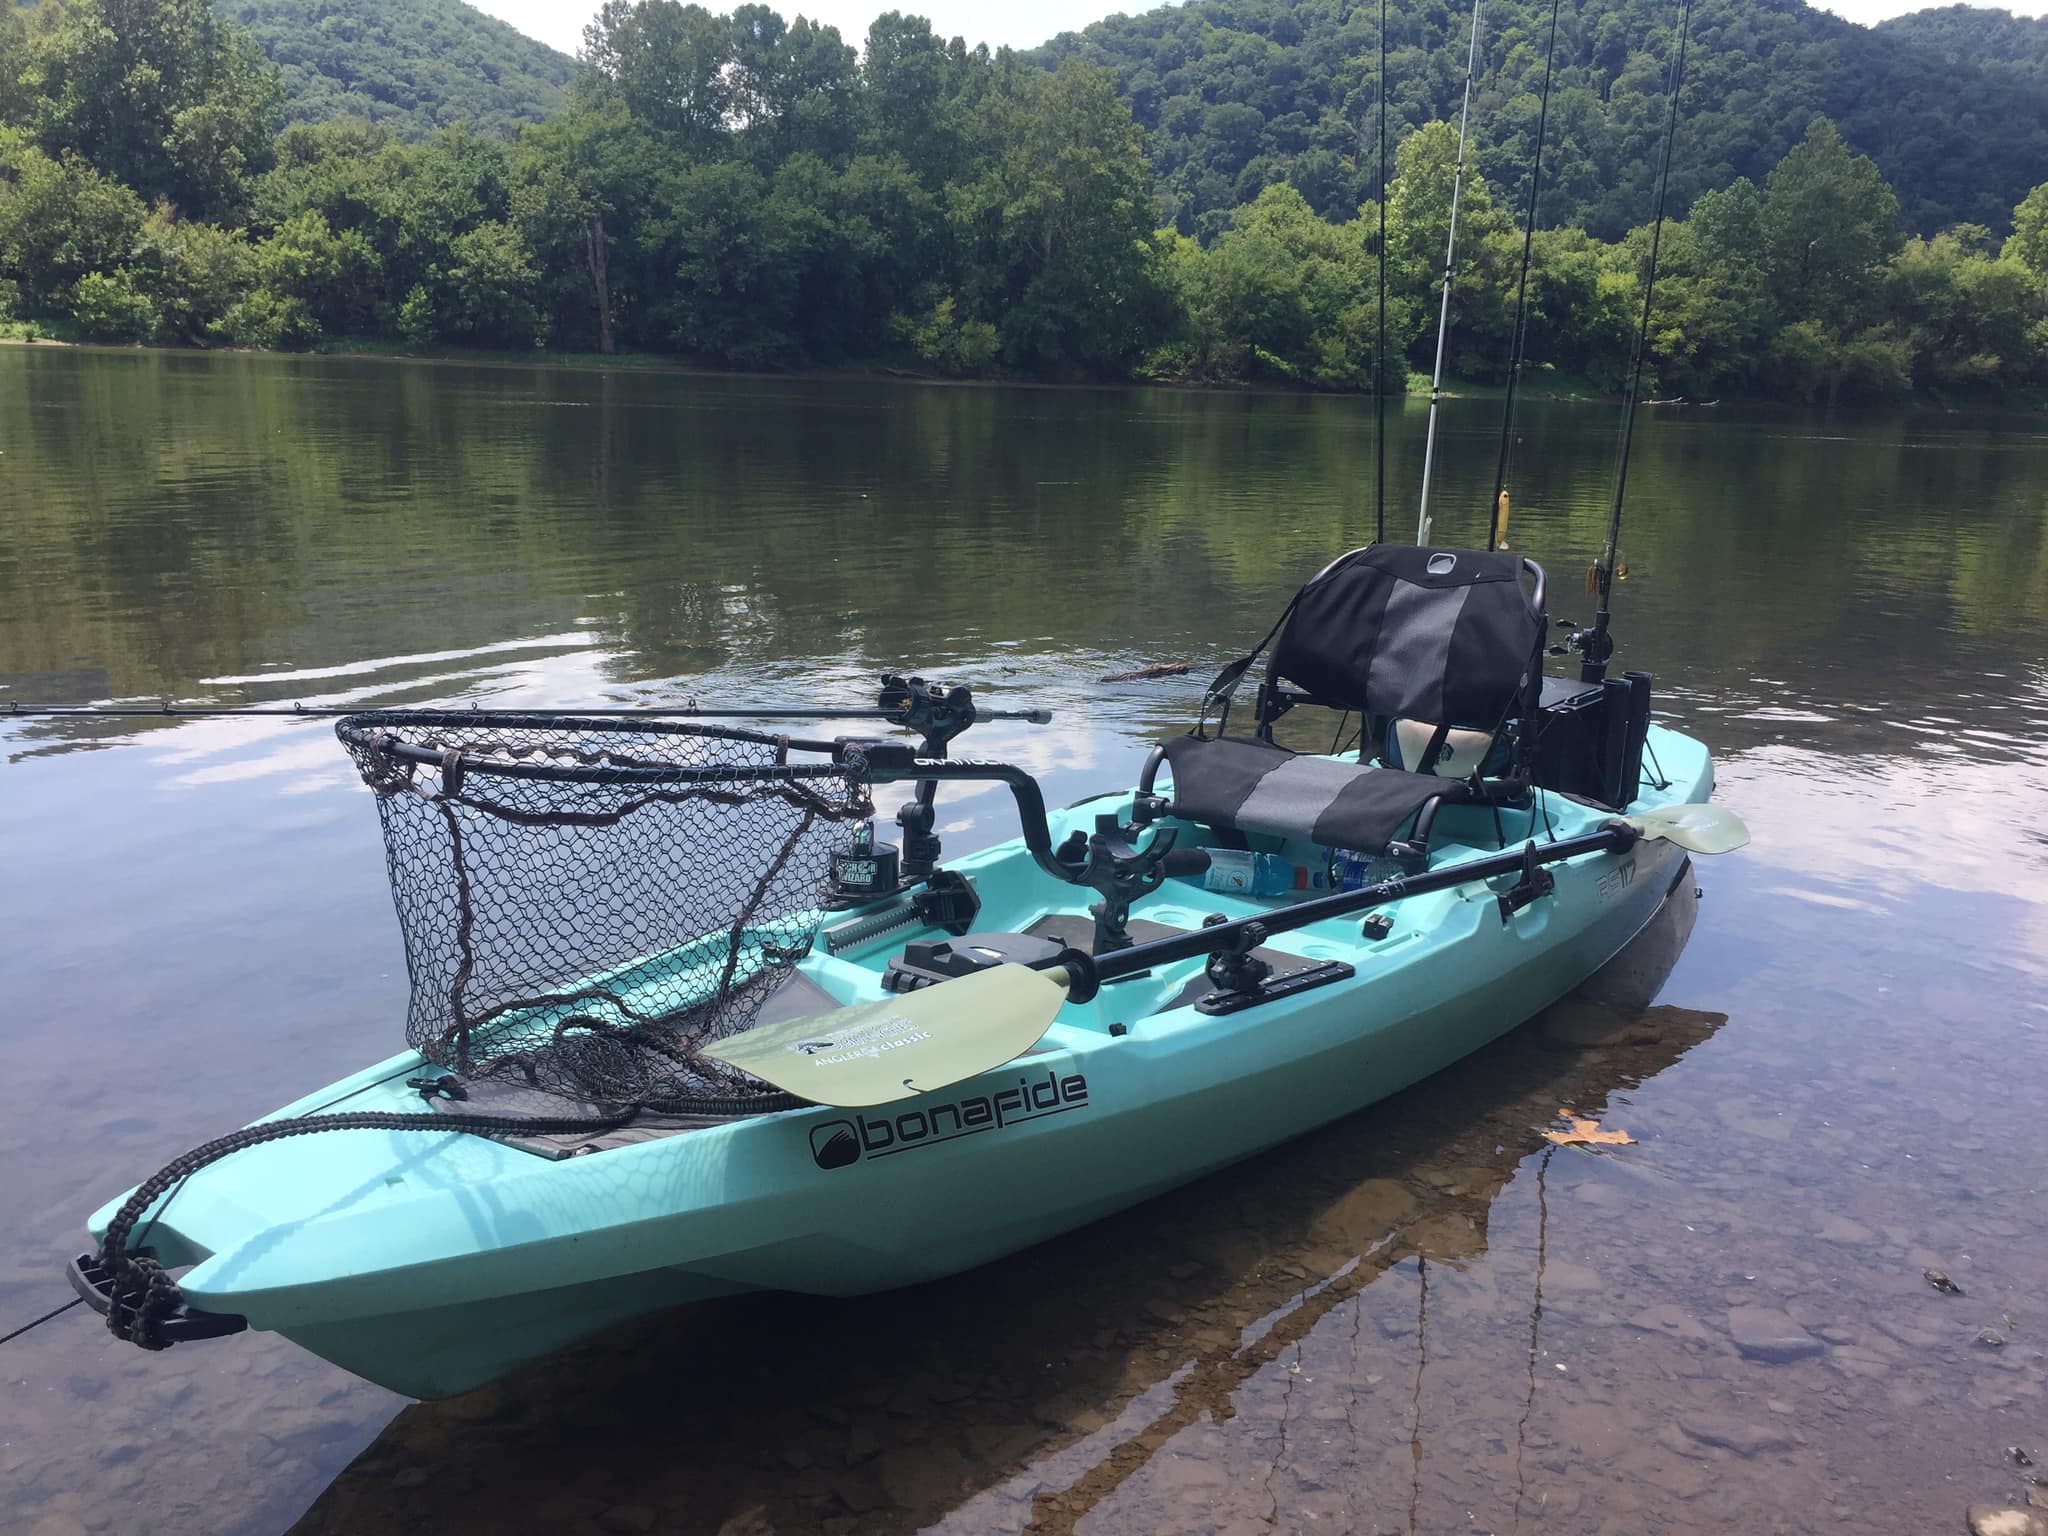 How to Pick a Kayak to Buy